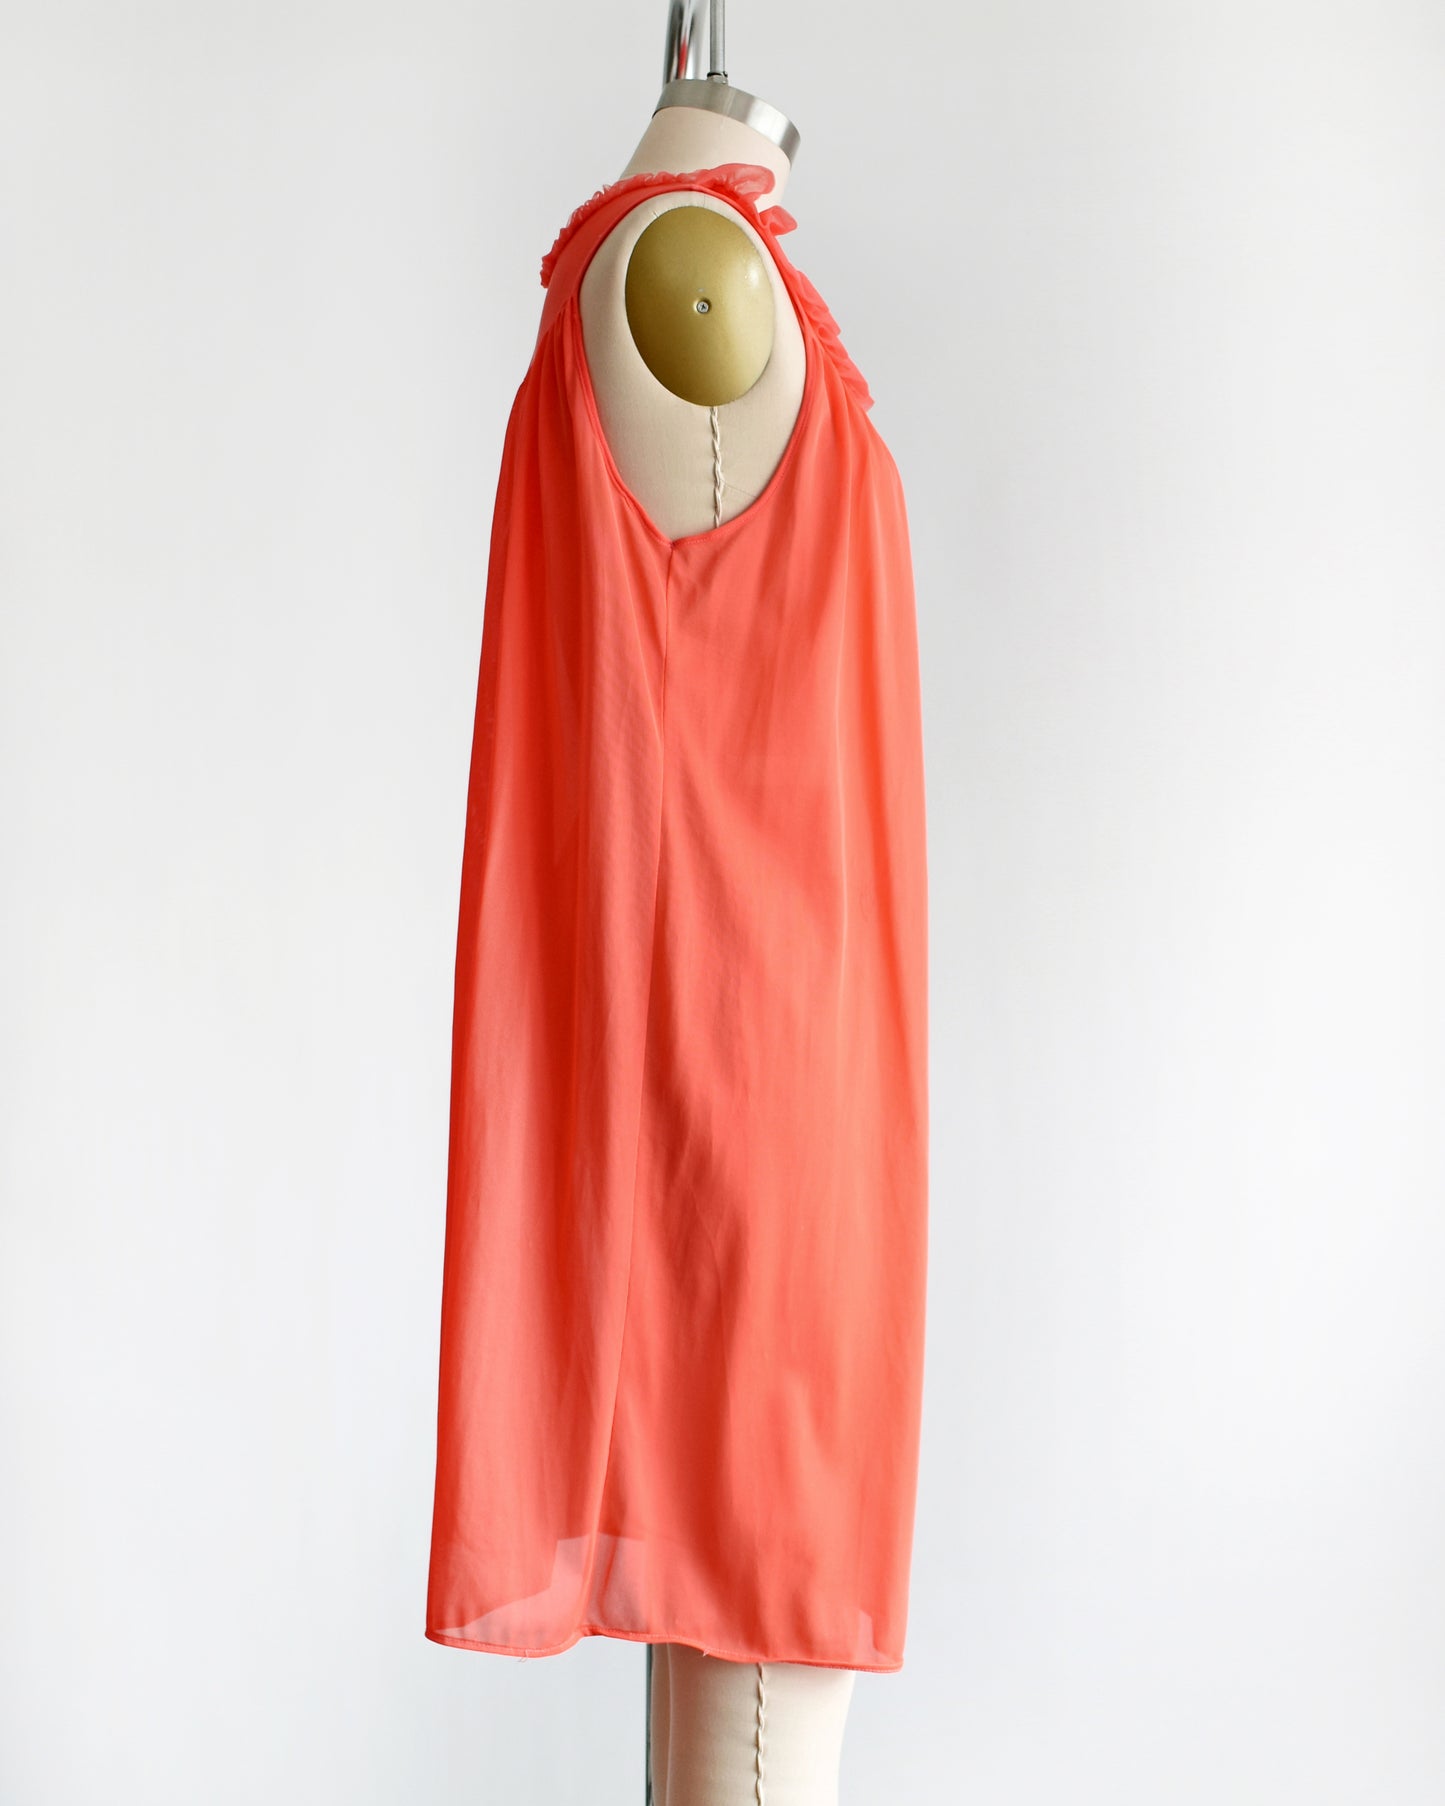 side view of a vintage 1960s/1970s hot coral ruffle nightie that has a ruffled neckline